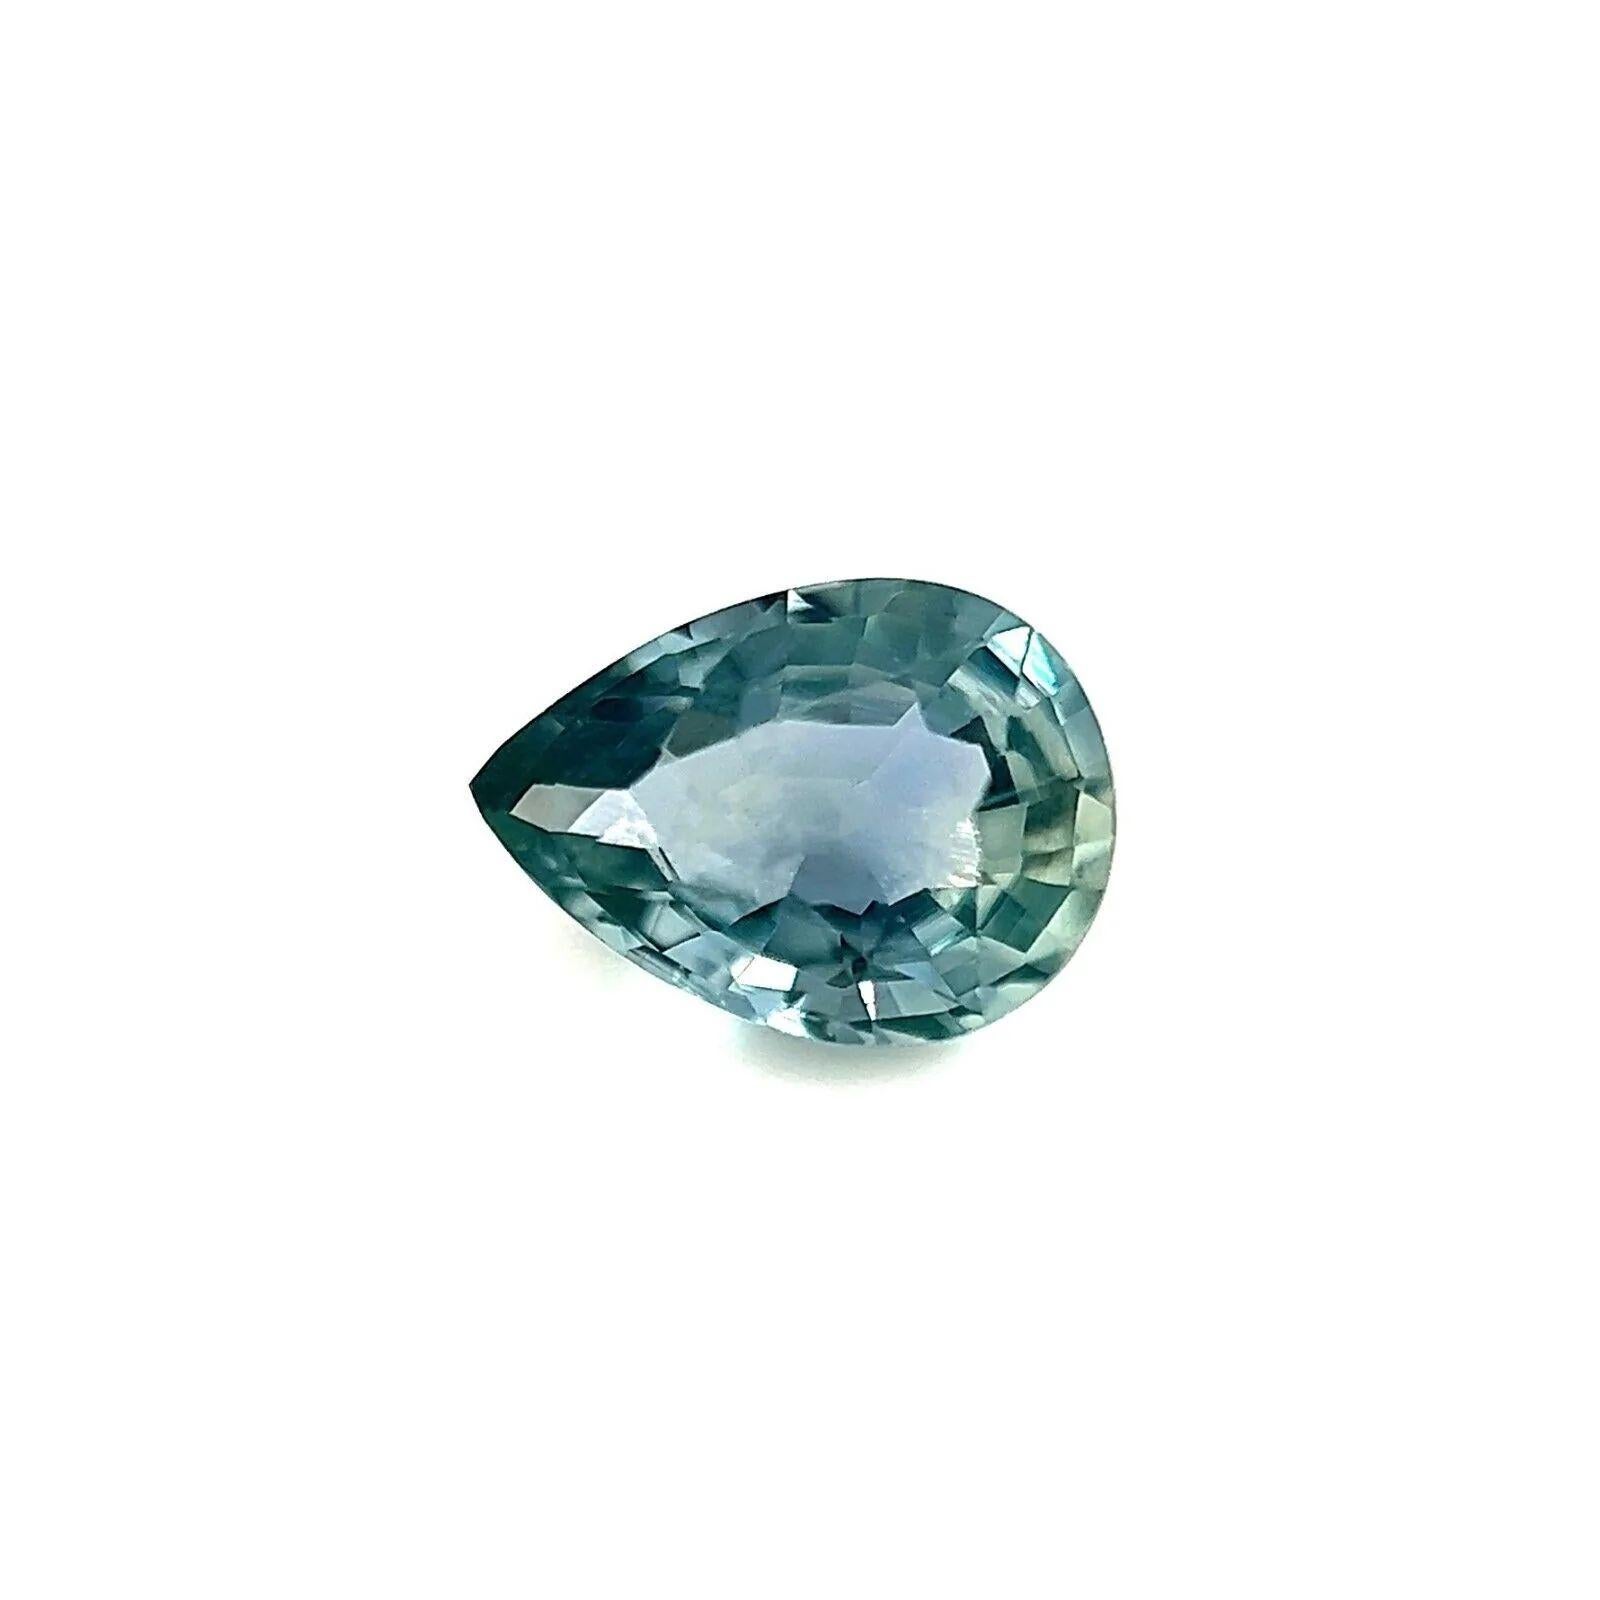 0.90ct Light Blue Green Australian Untreated Sapphire Pear Cut 7x5mm Loose Gem

Natural Untreated Australian Light Blue Green Sapphire.
0.90 Carat with a beautiful light blue green colour and an excellent pear cut and ideal polish to show great